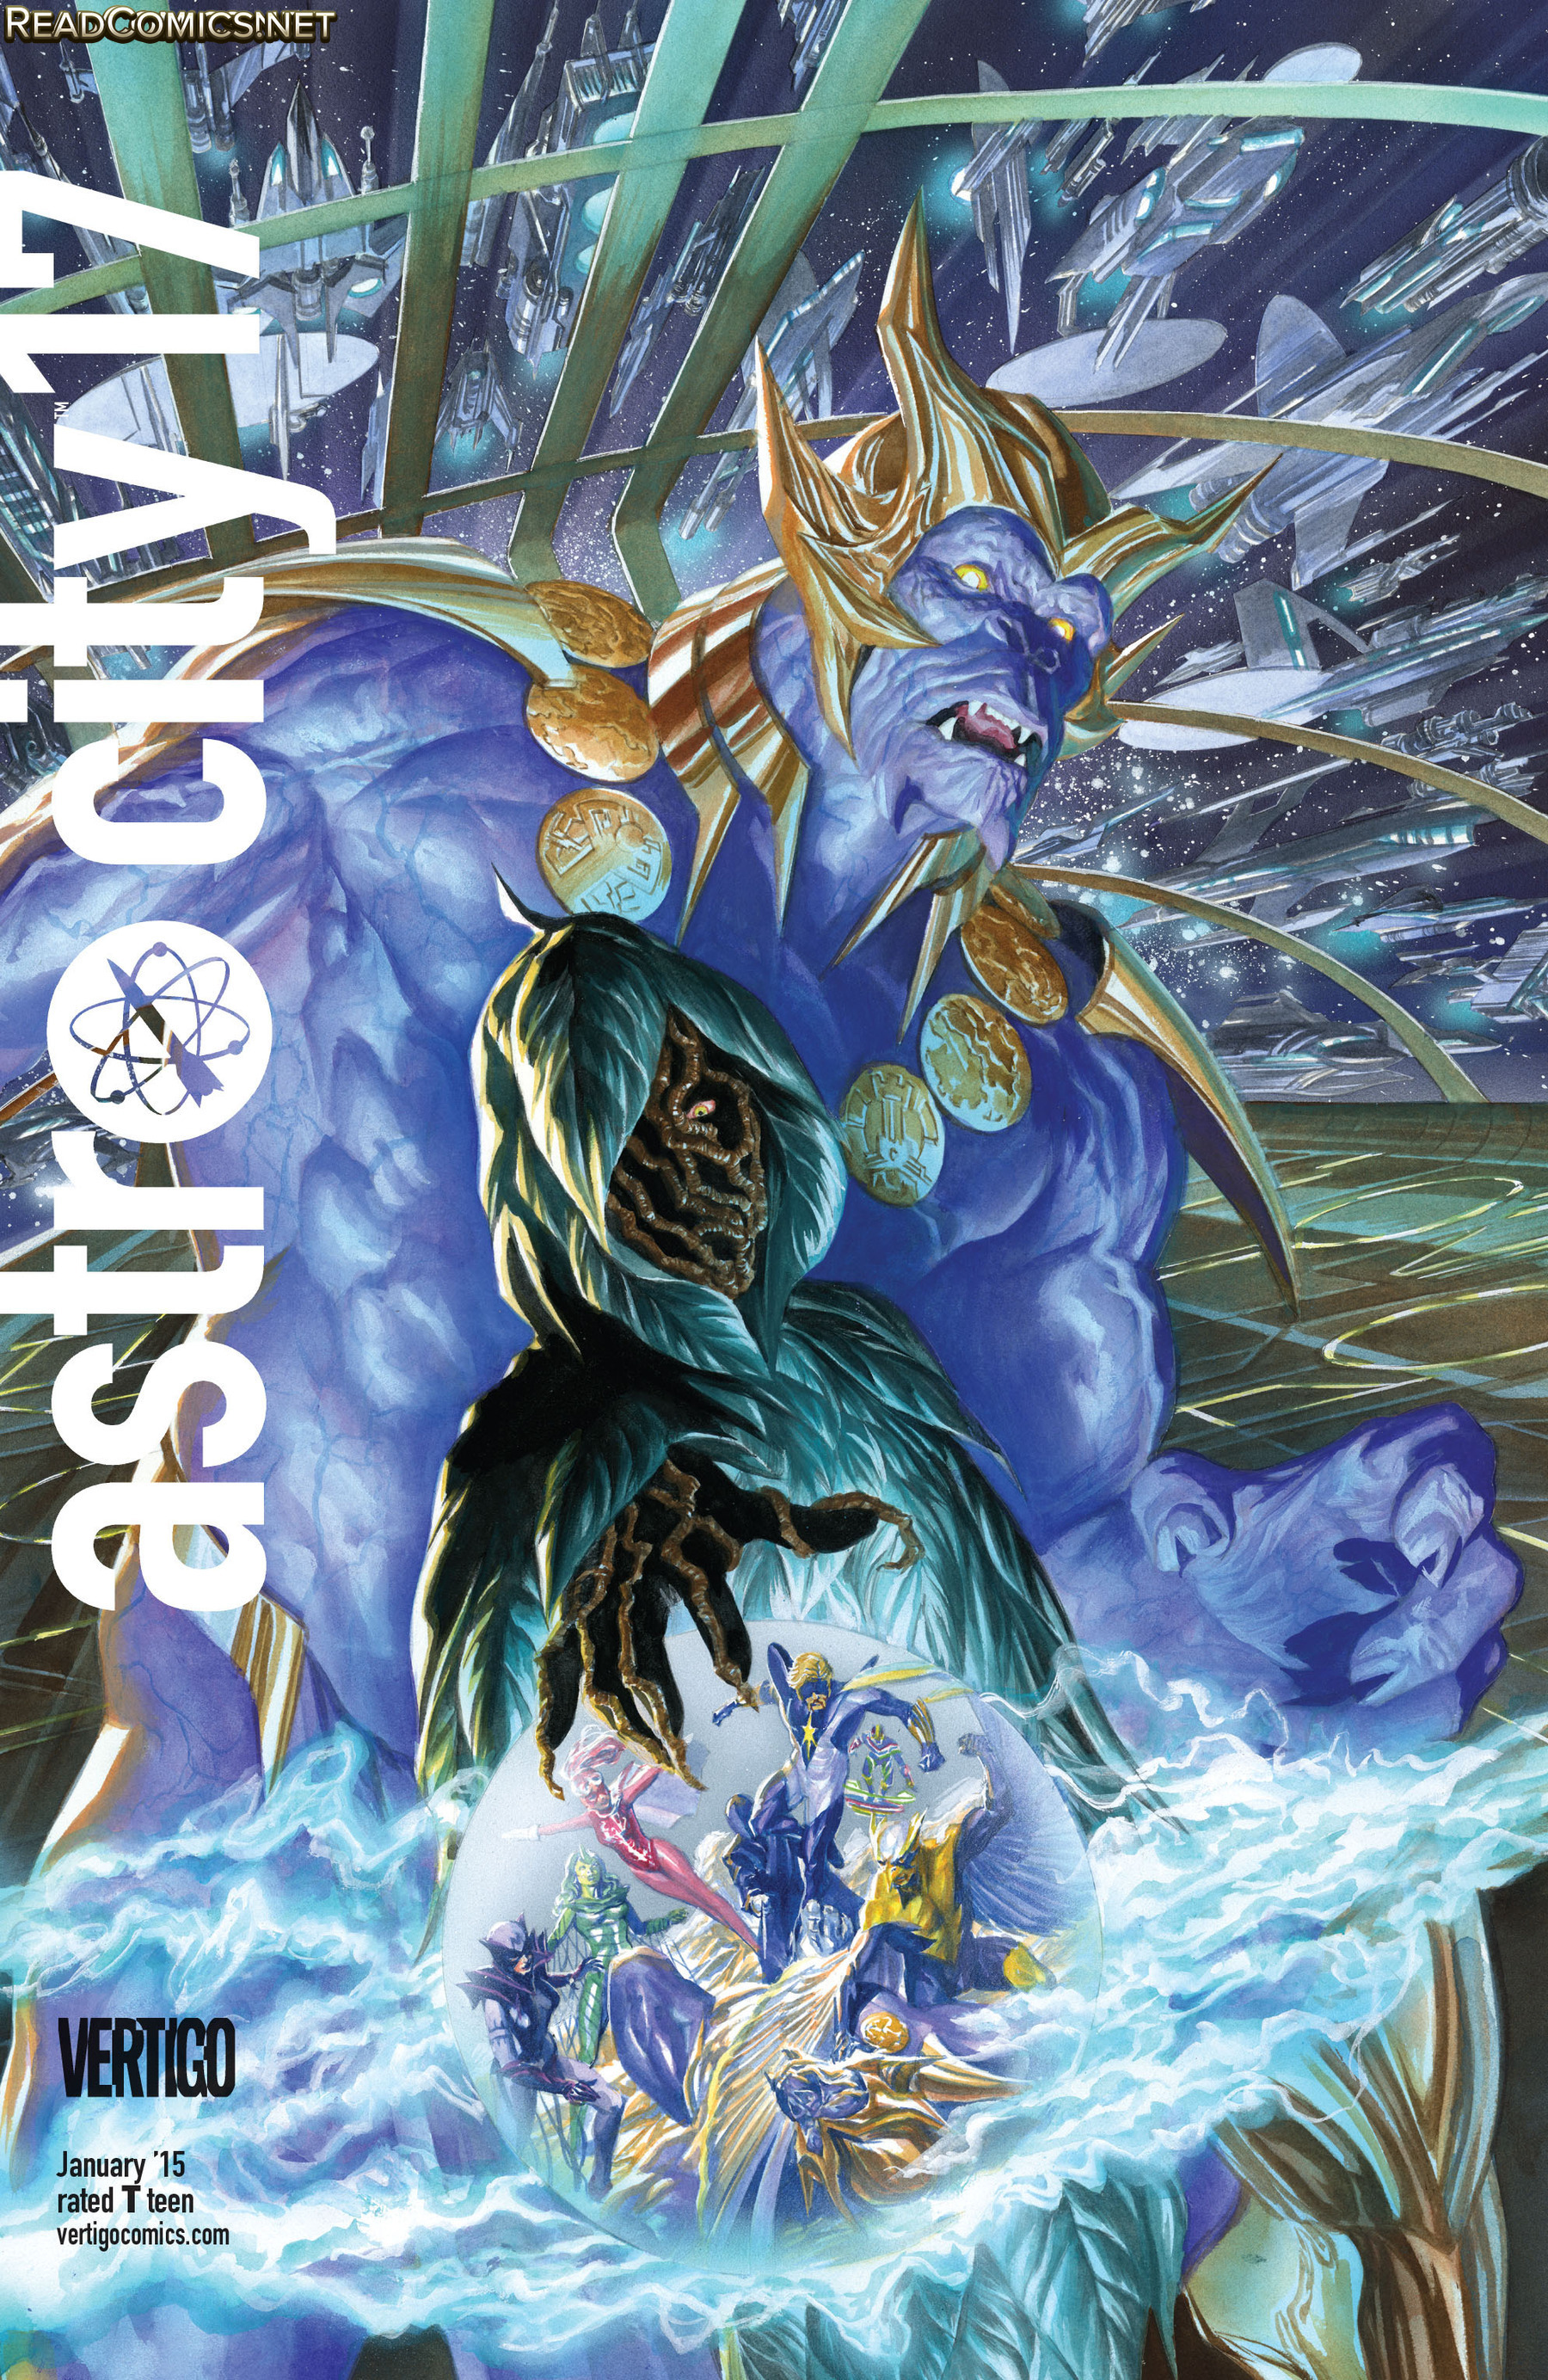 Astro City (2013-): Chapter 17 - Page 1